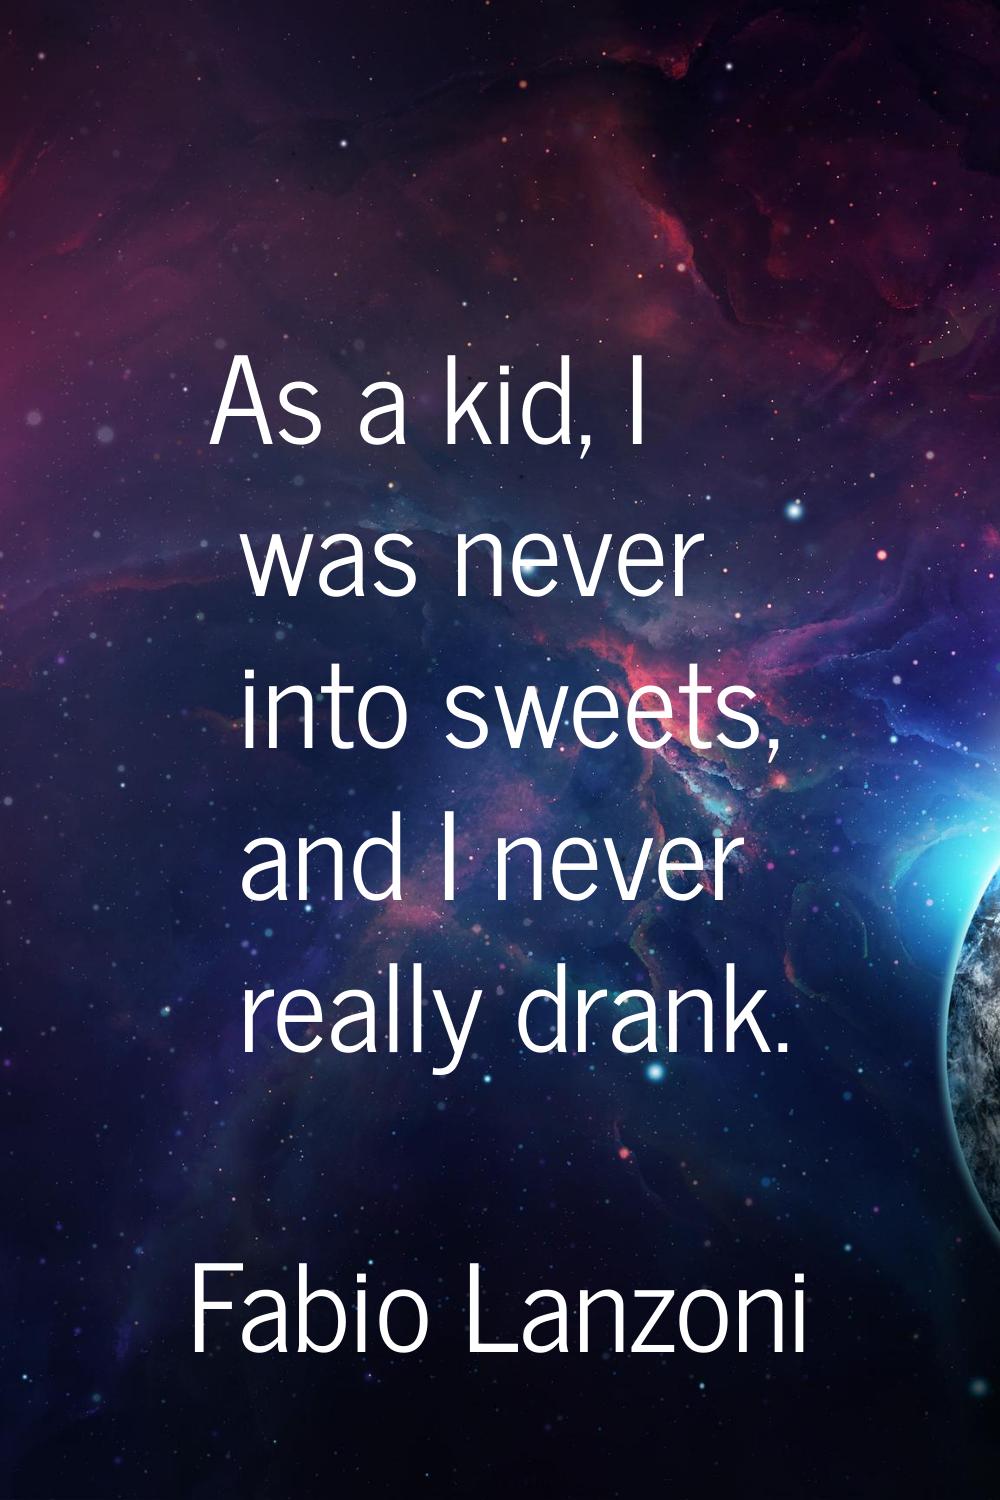 As a kid, I was never into sweets, and I never really drank.